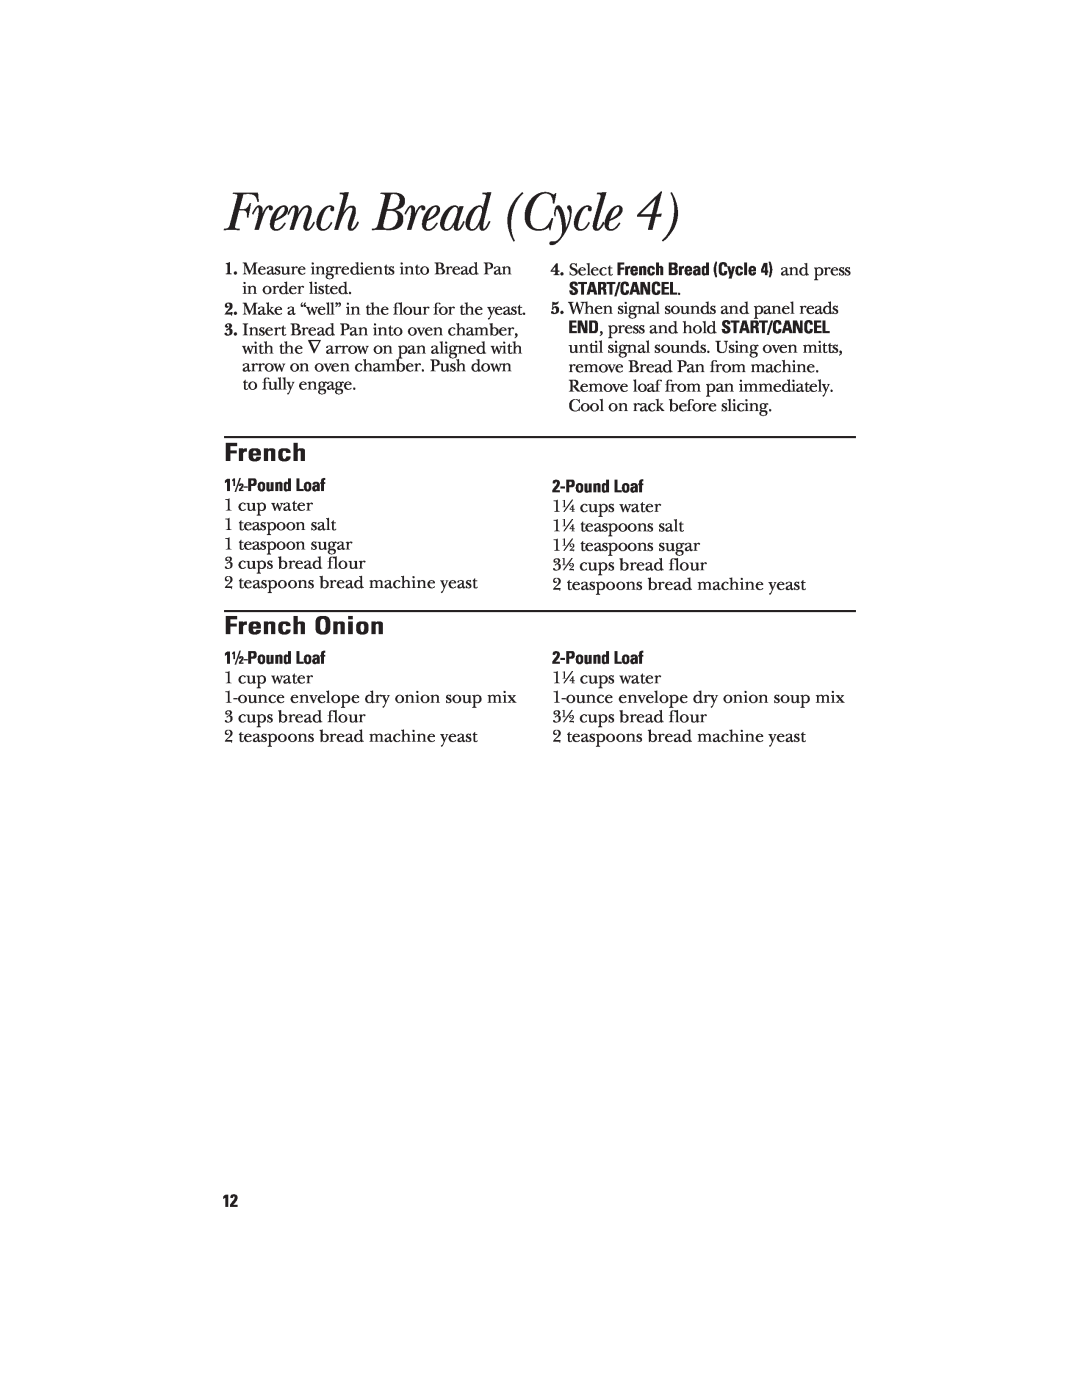 GE 840081500 quick start French Onion, Select French Bread Cycle 4 and press START/CANCEL, 11⁄2-Pound Loaf 